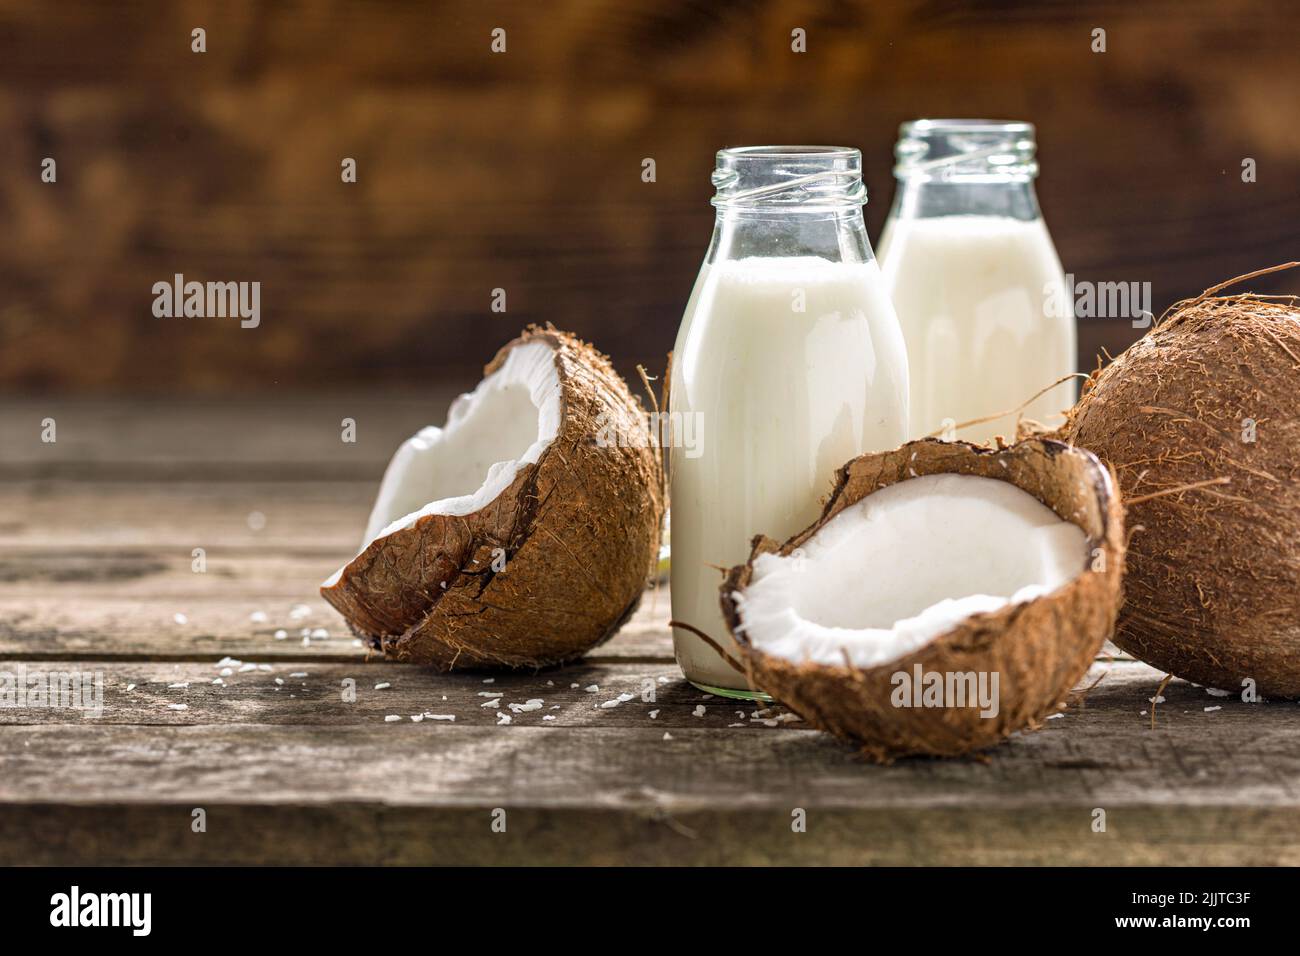 Vegan non dairy healthy or fermented drink Coconut kefir in glass bottle healthy drink Stock Photo